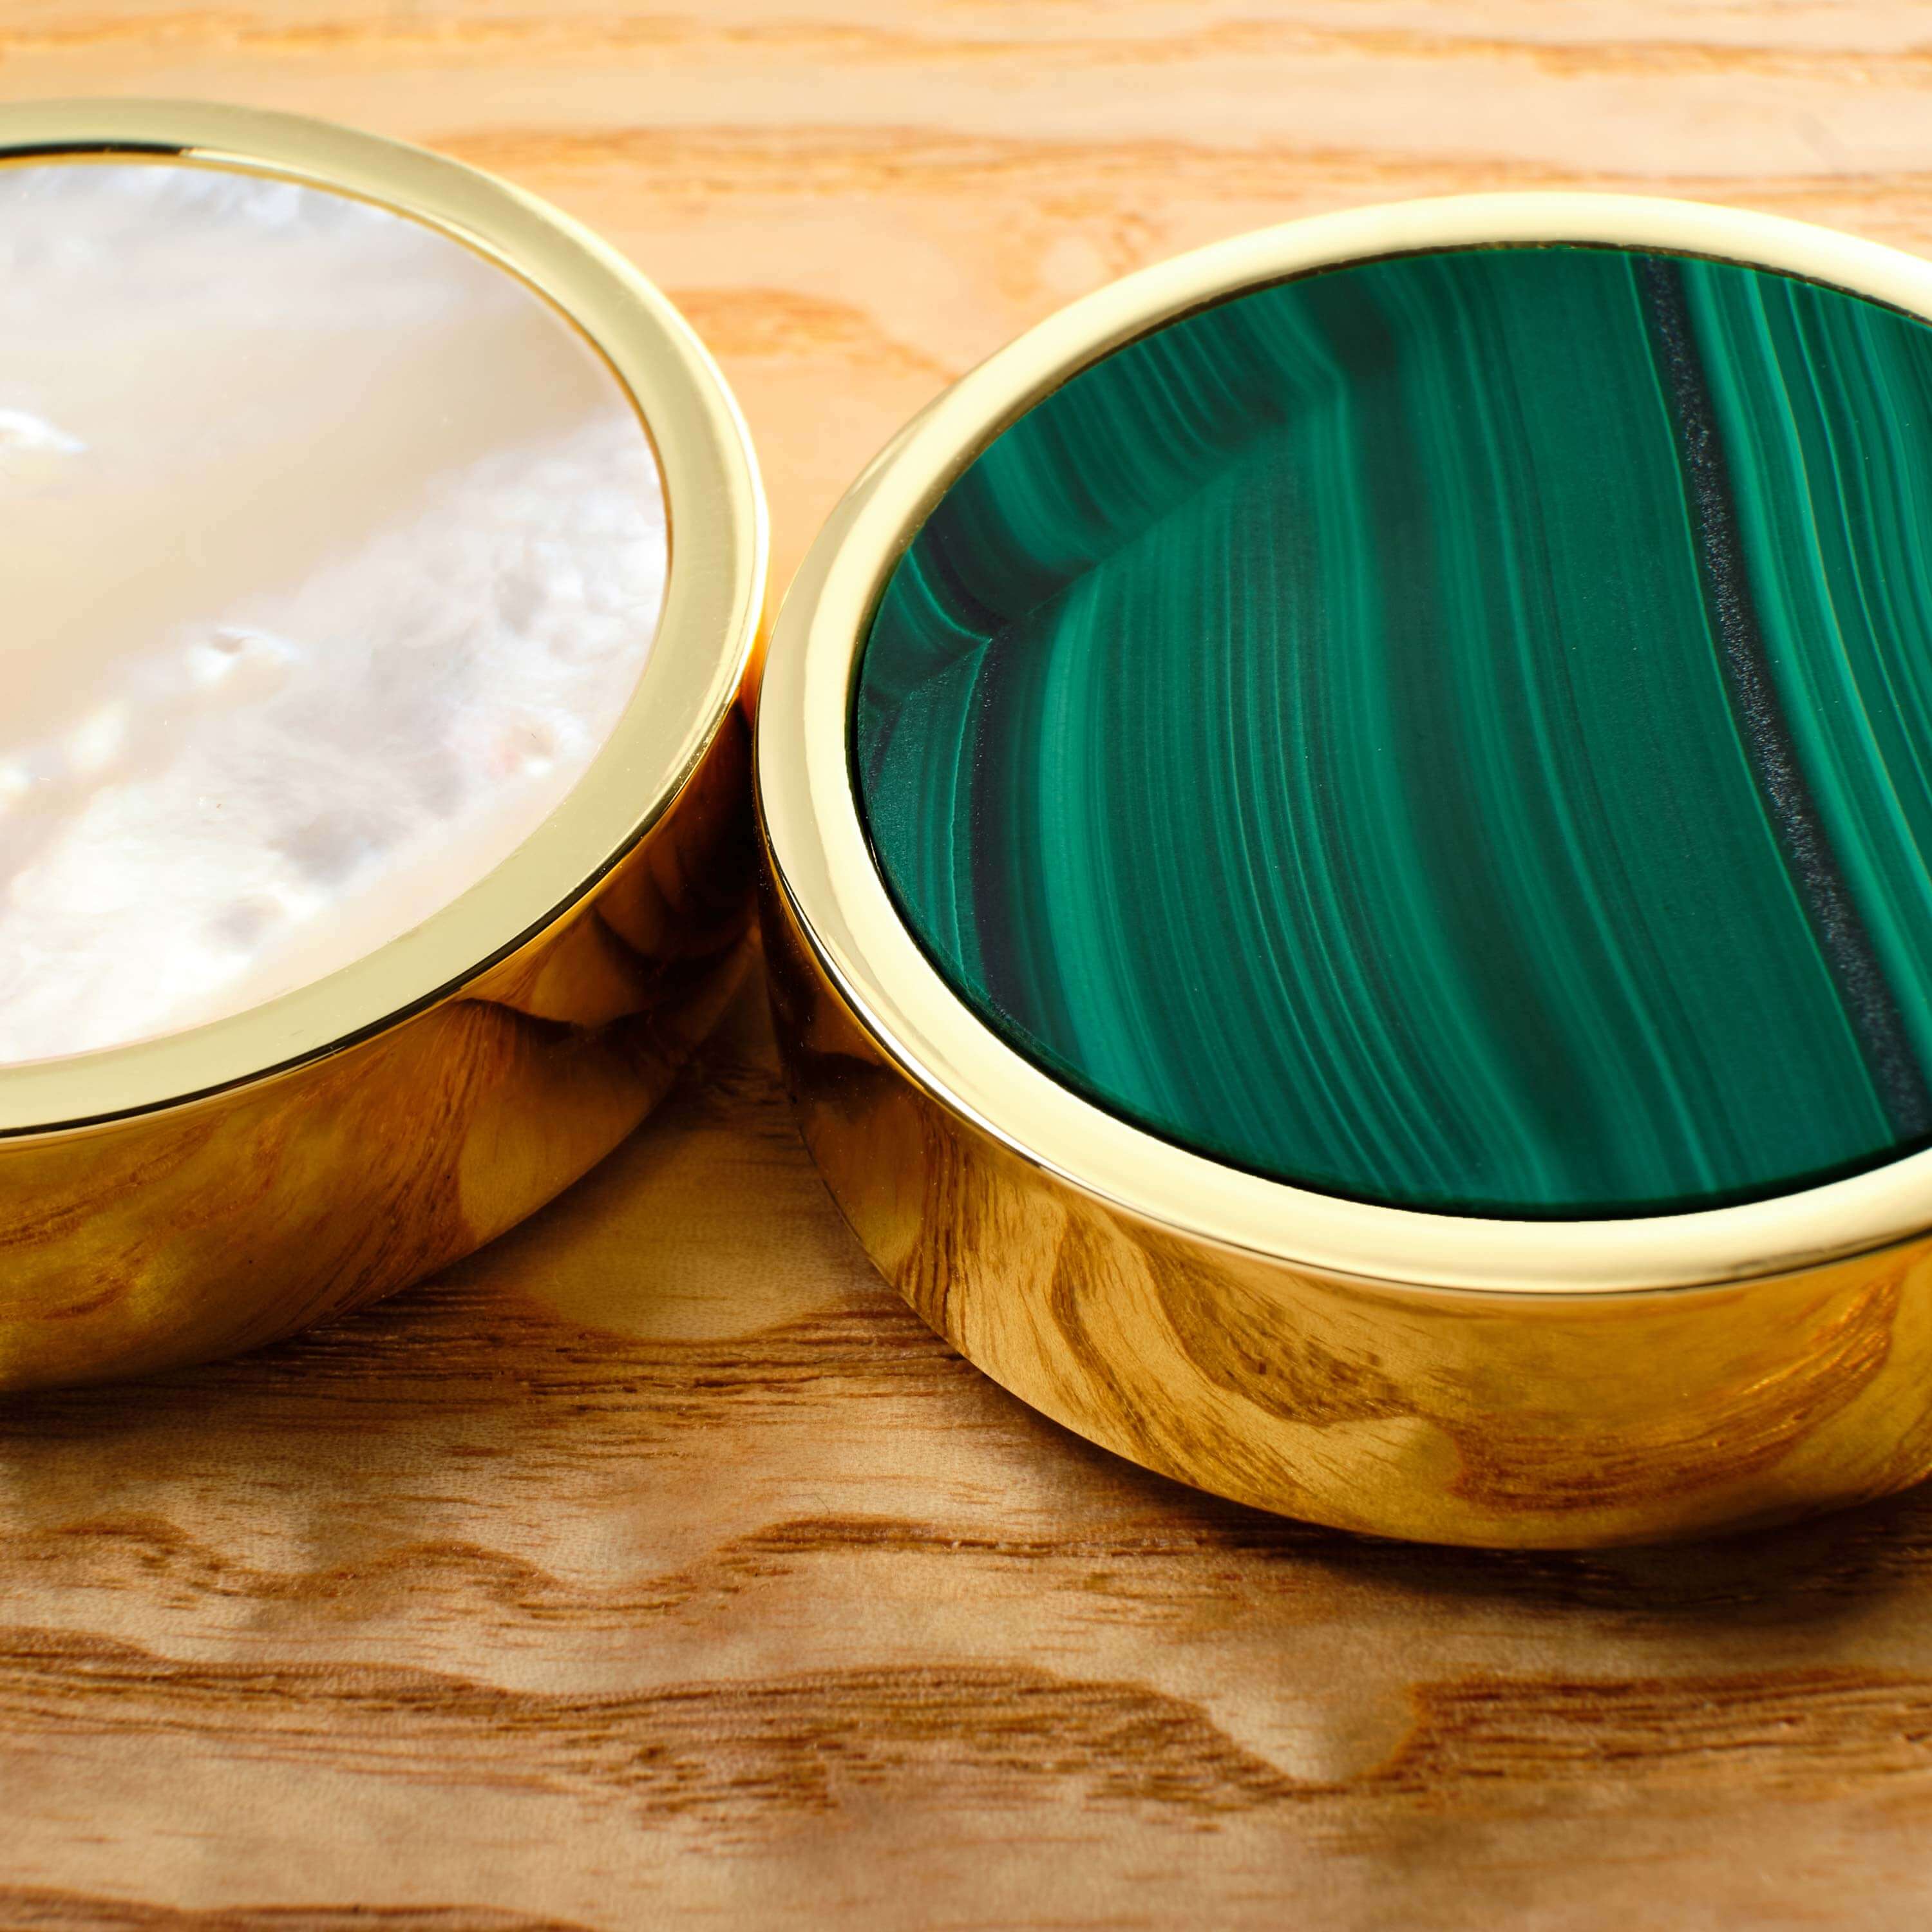 malachite and mother of pearl playing pieces